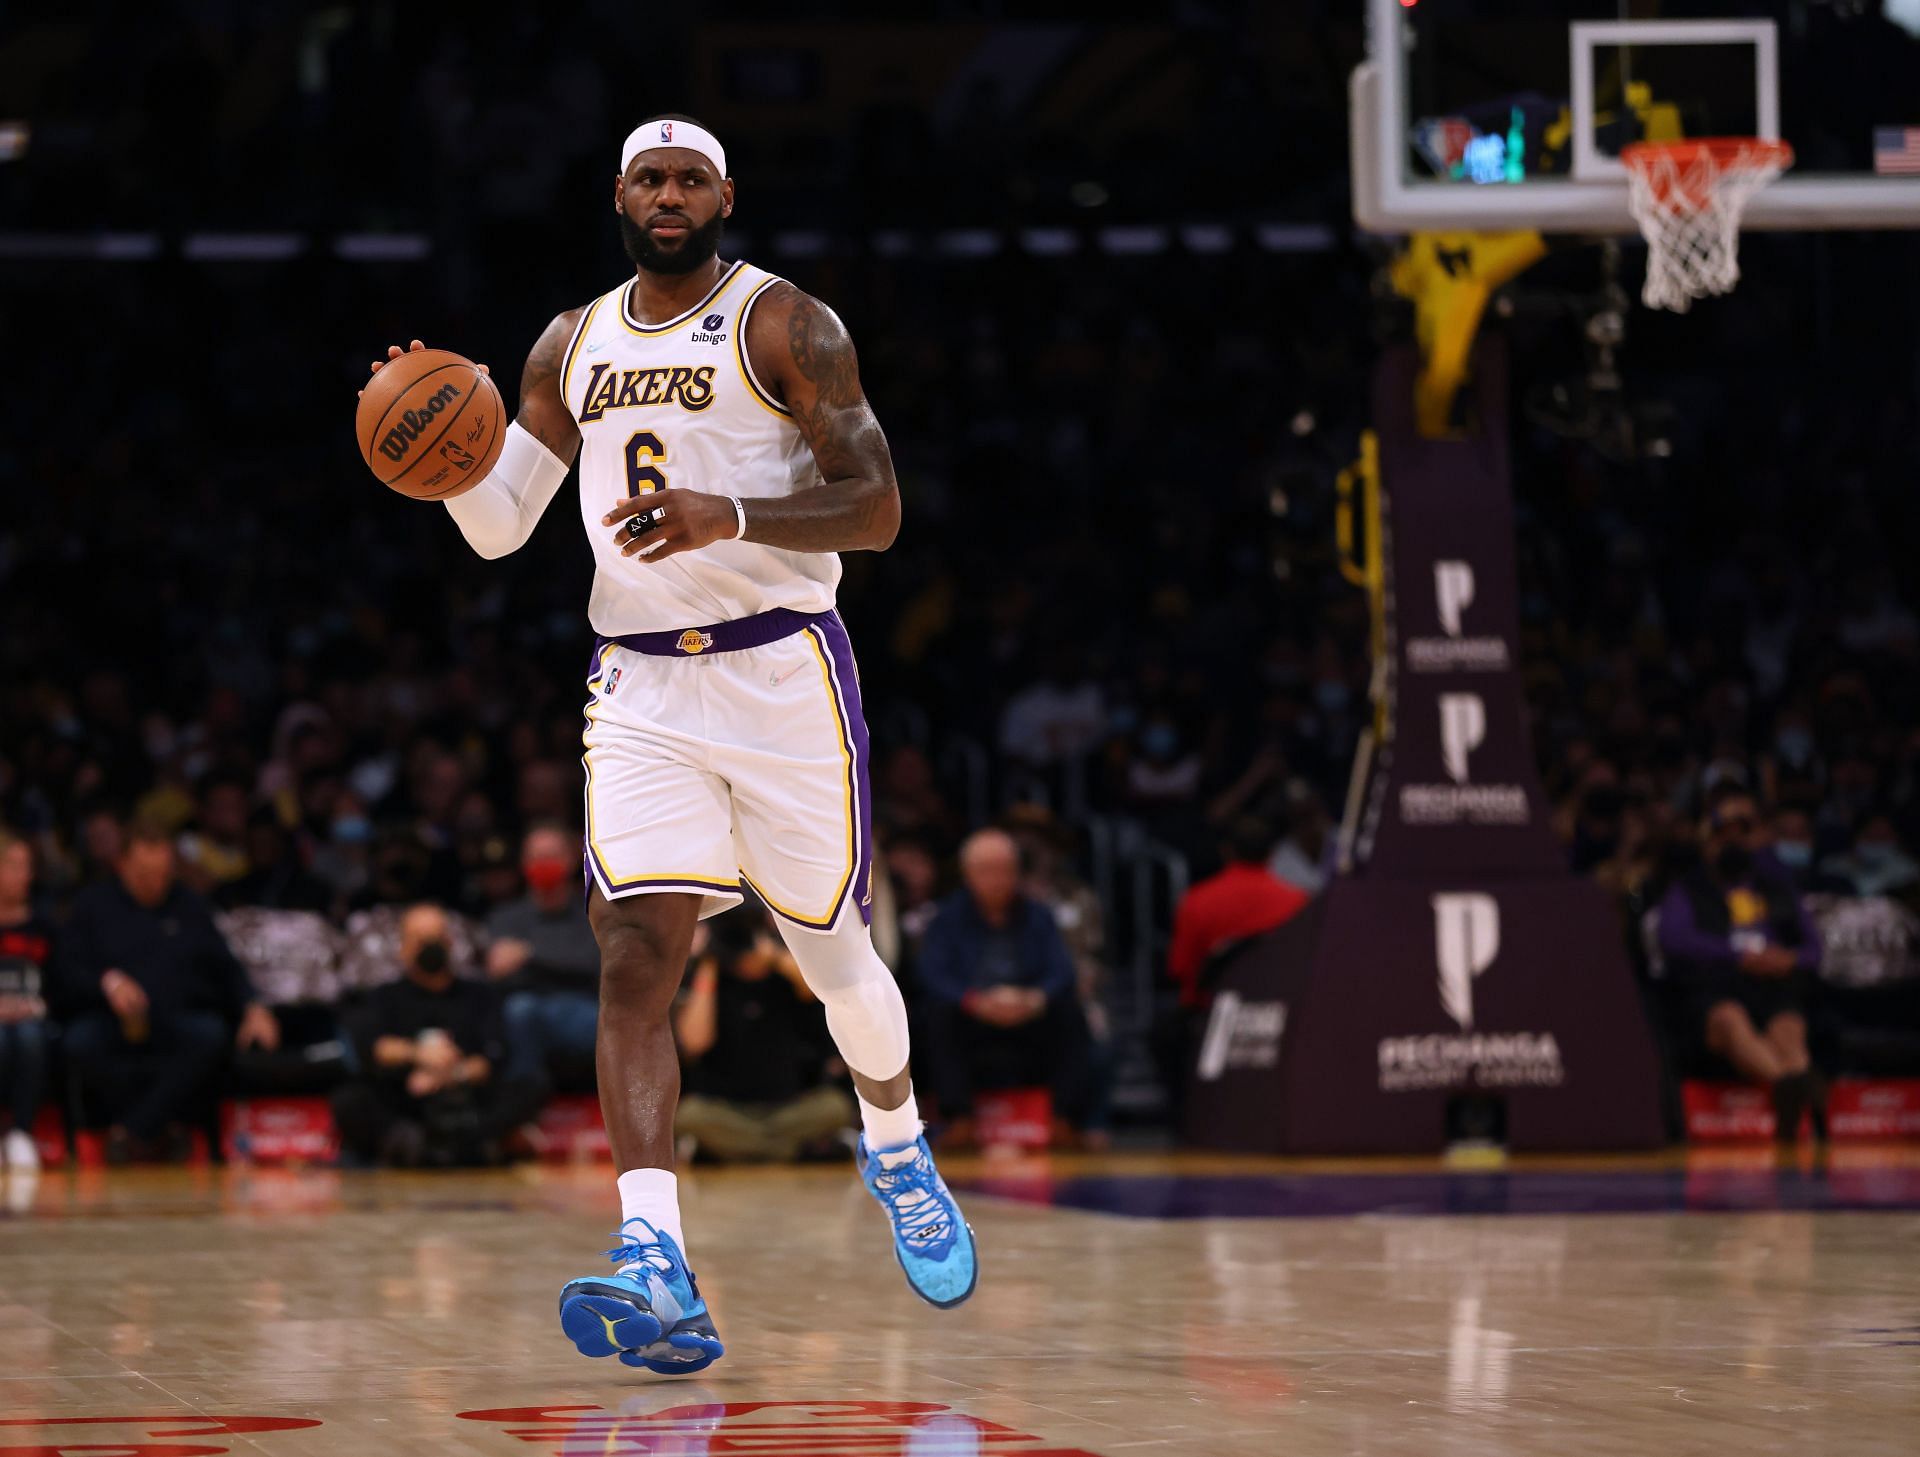 LA Lakers superstar LeBron James will be itching to get on the court and set things right.